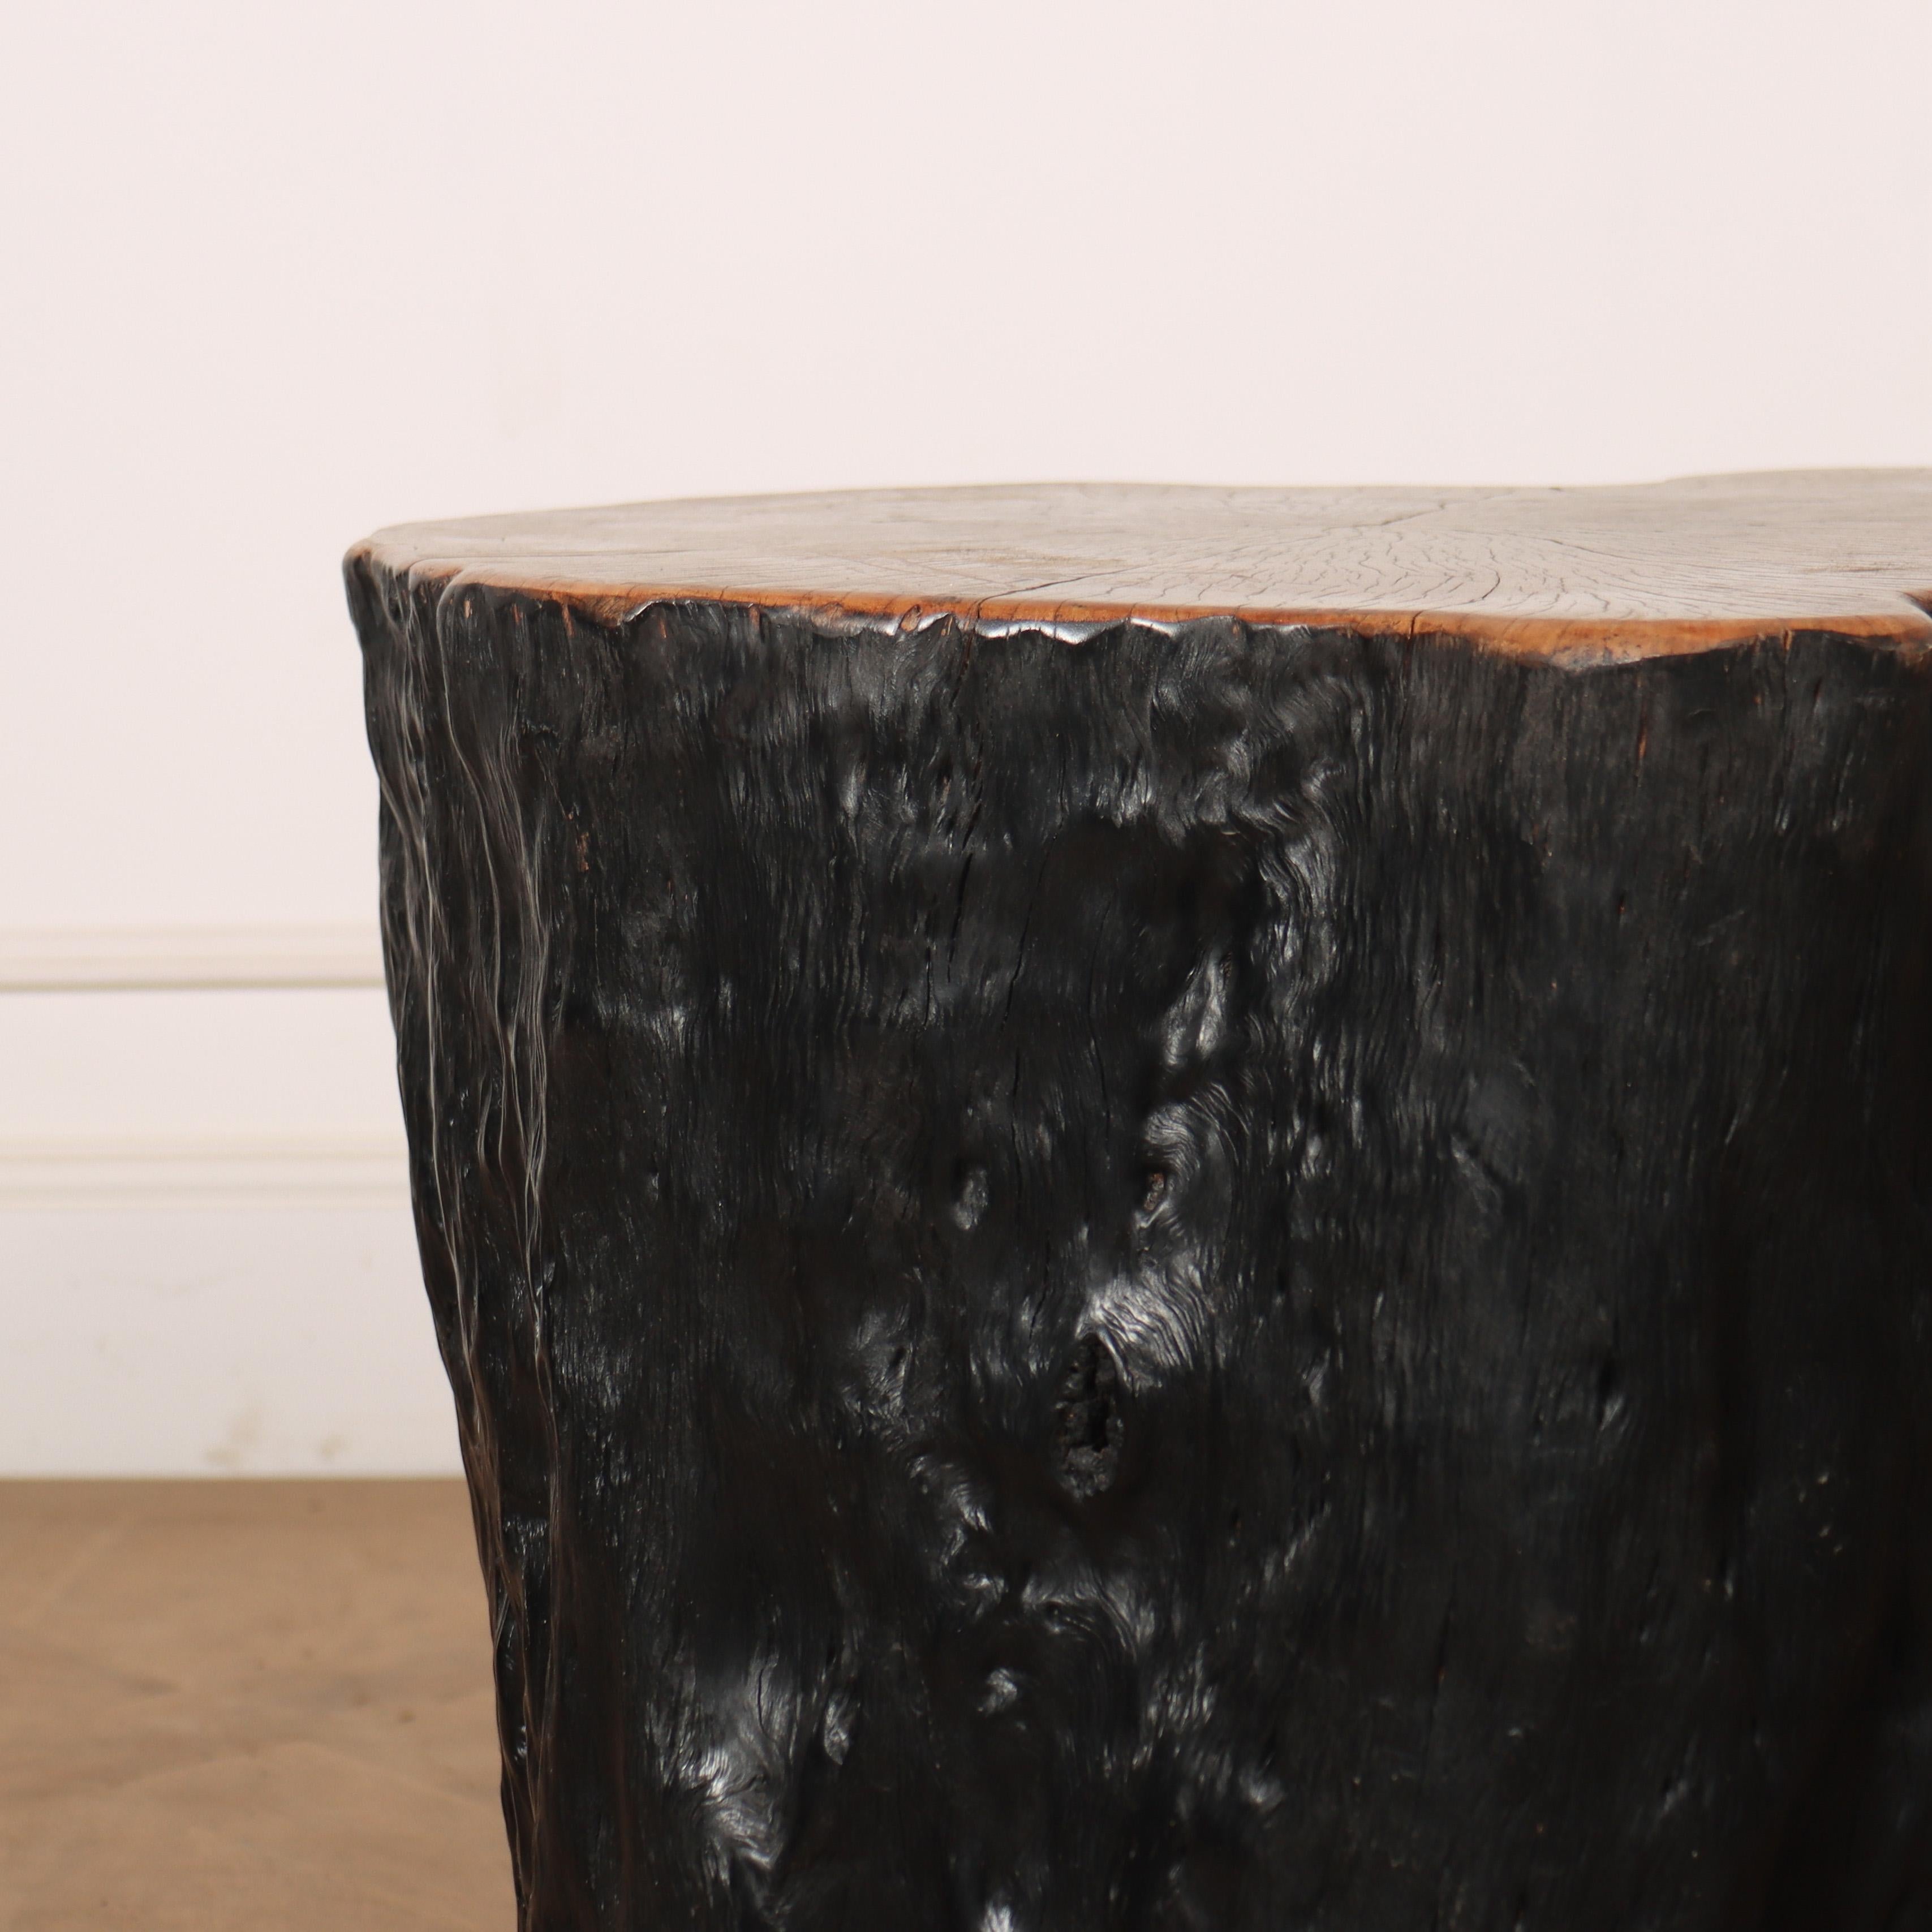 Primitive lychee side table. Hand carved and finished using a Japanese technique called Shou-Sugi Ban.

Reference: 8153

Dimensions
20 inches (51 cms) High
21 inches (53 cms) Diameter